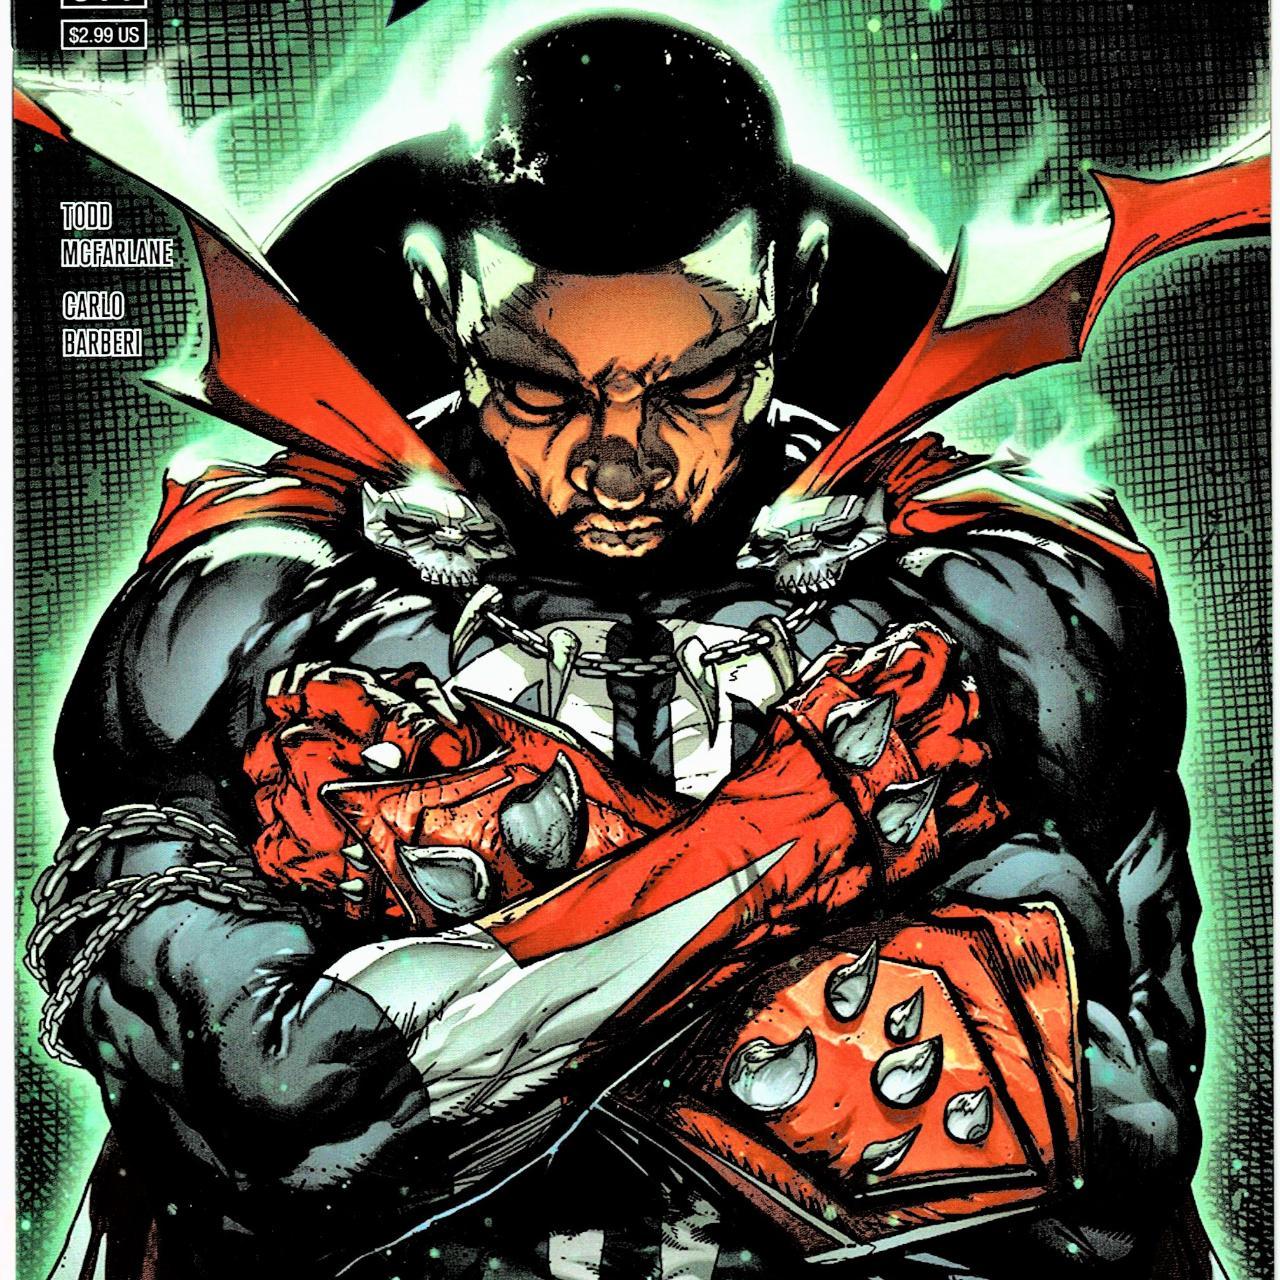 Product Image 1 - THE TOM MCFARLANES SPAWN CHADWICK